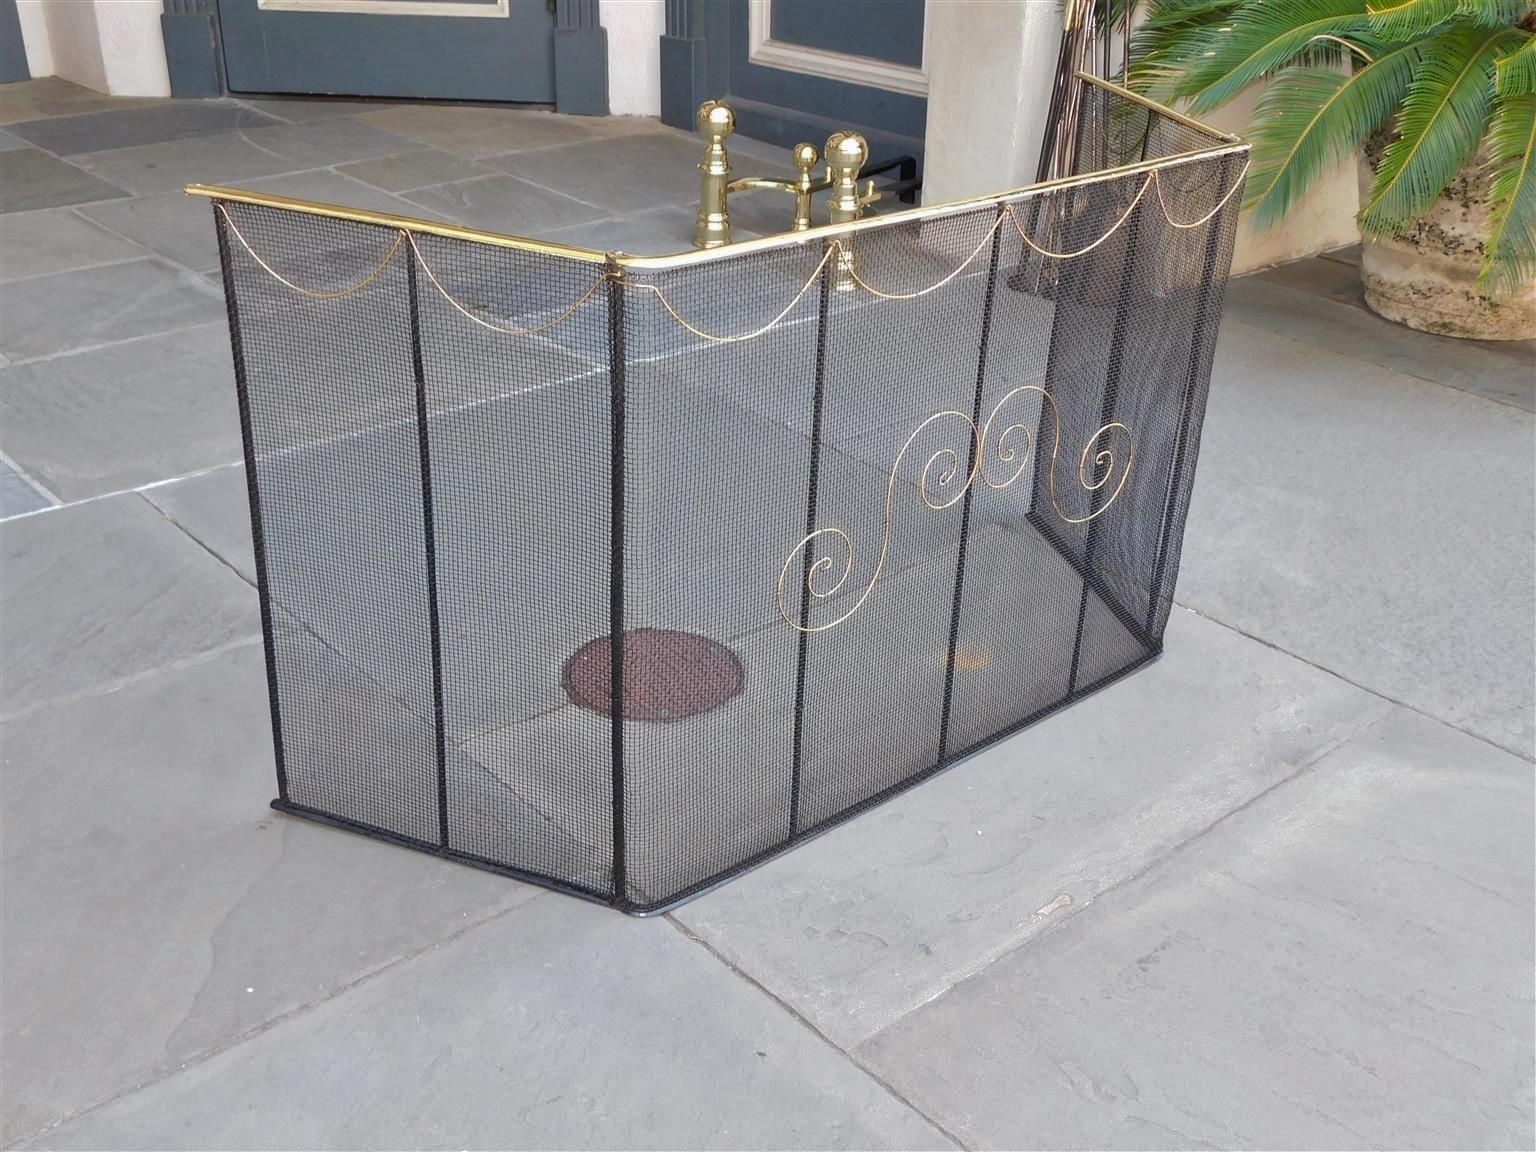 American brass swag & pleasing wire work fire place screen with flanking hinged side panels, late 18th century
24